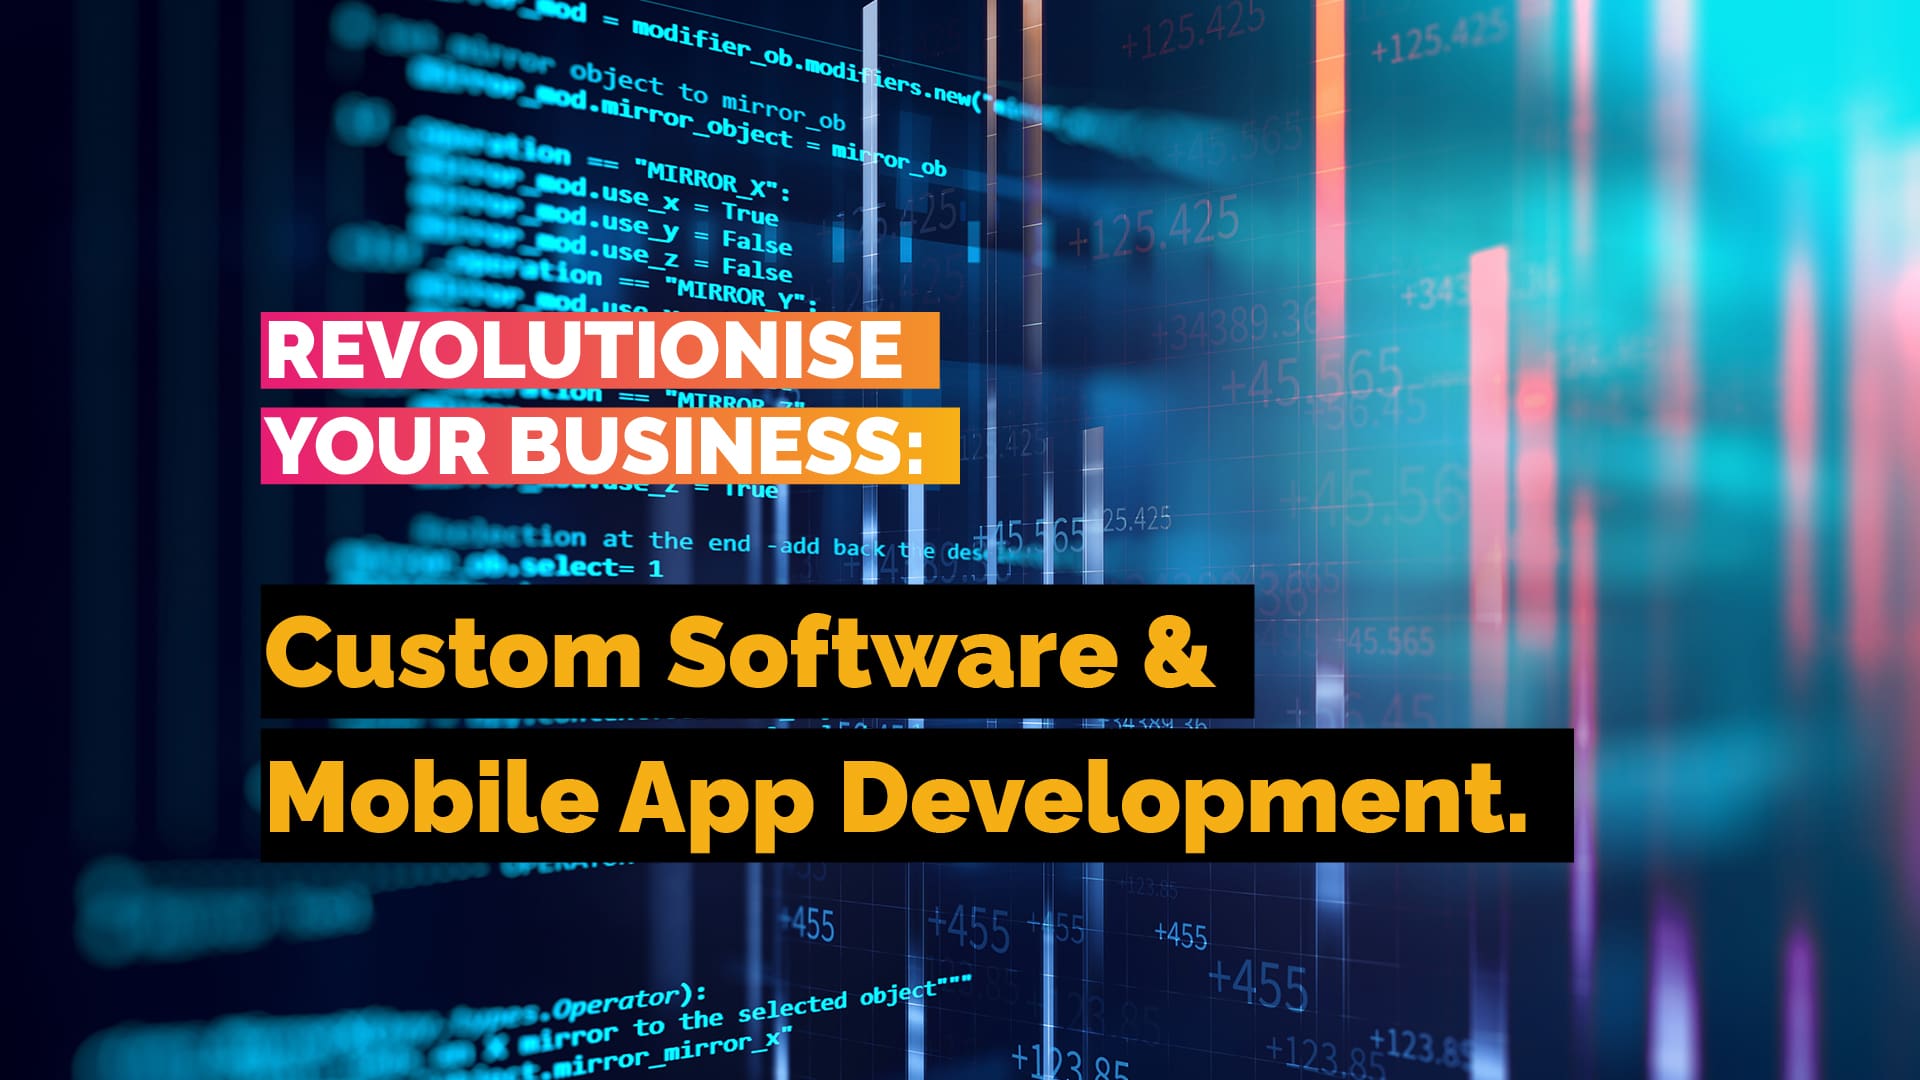 Revolutionise Your Business with Custom Software and Mobile App Development - VOiD Applications